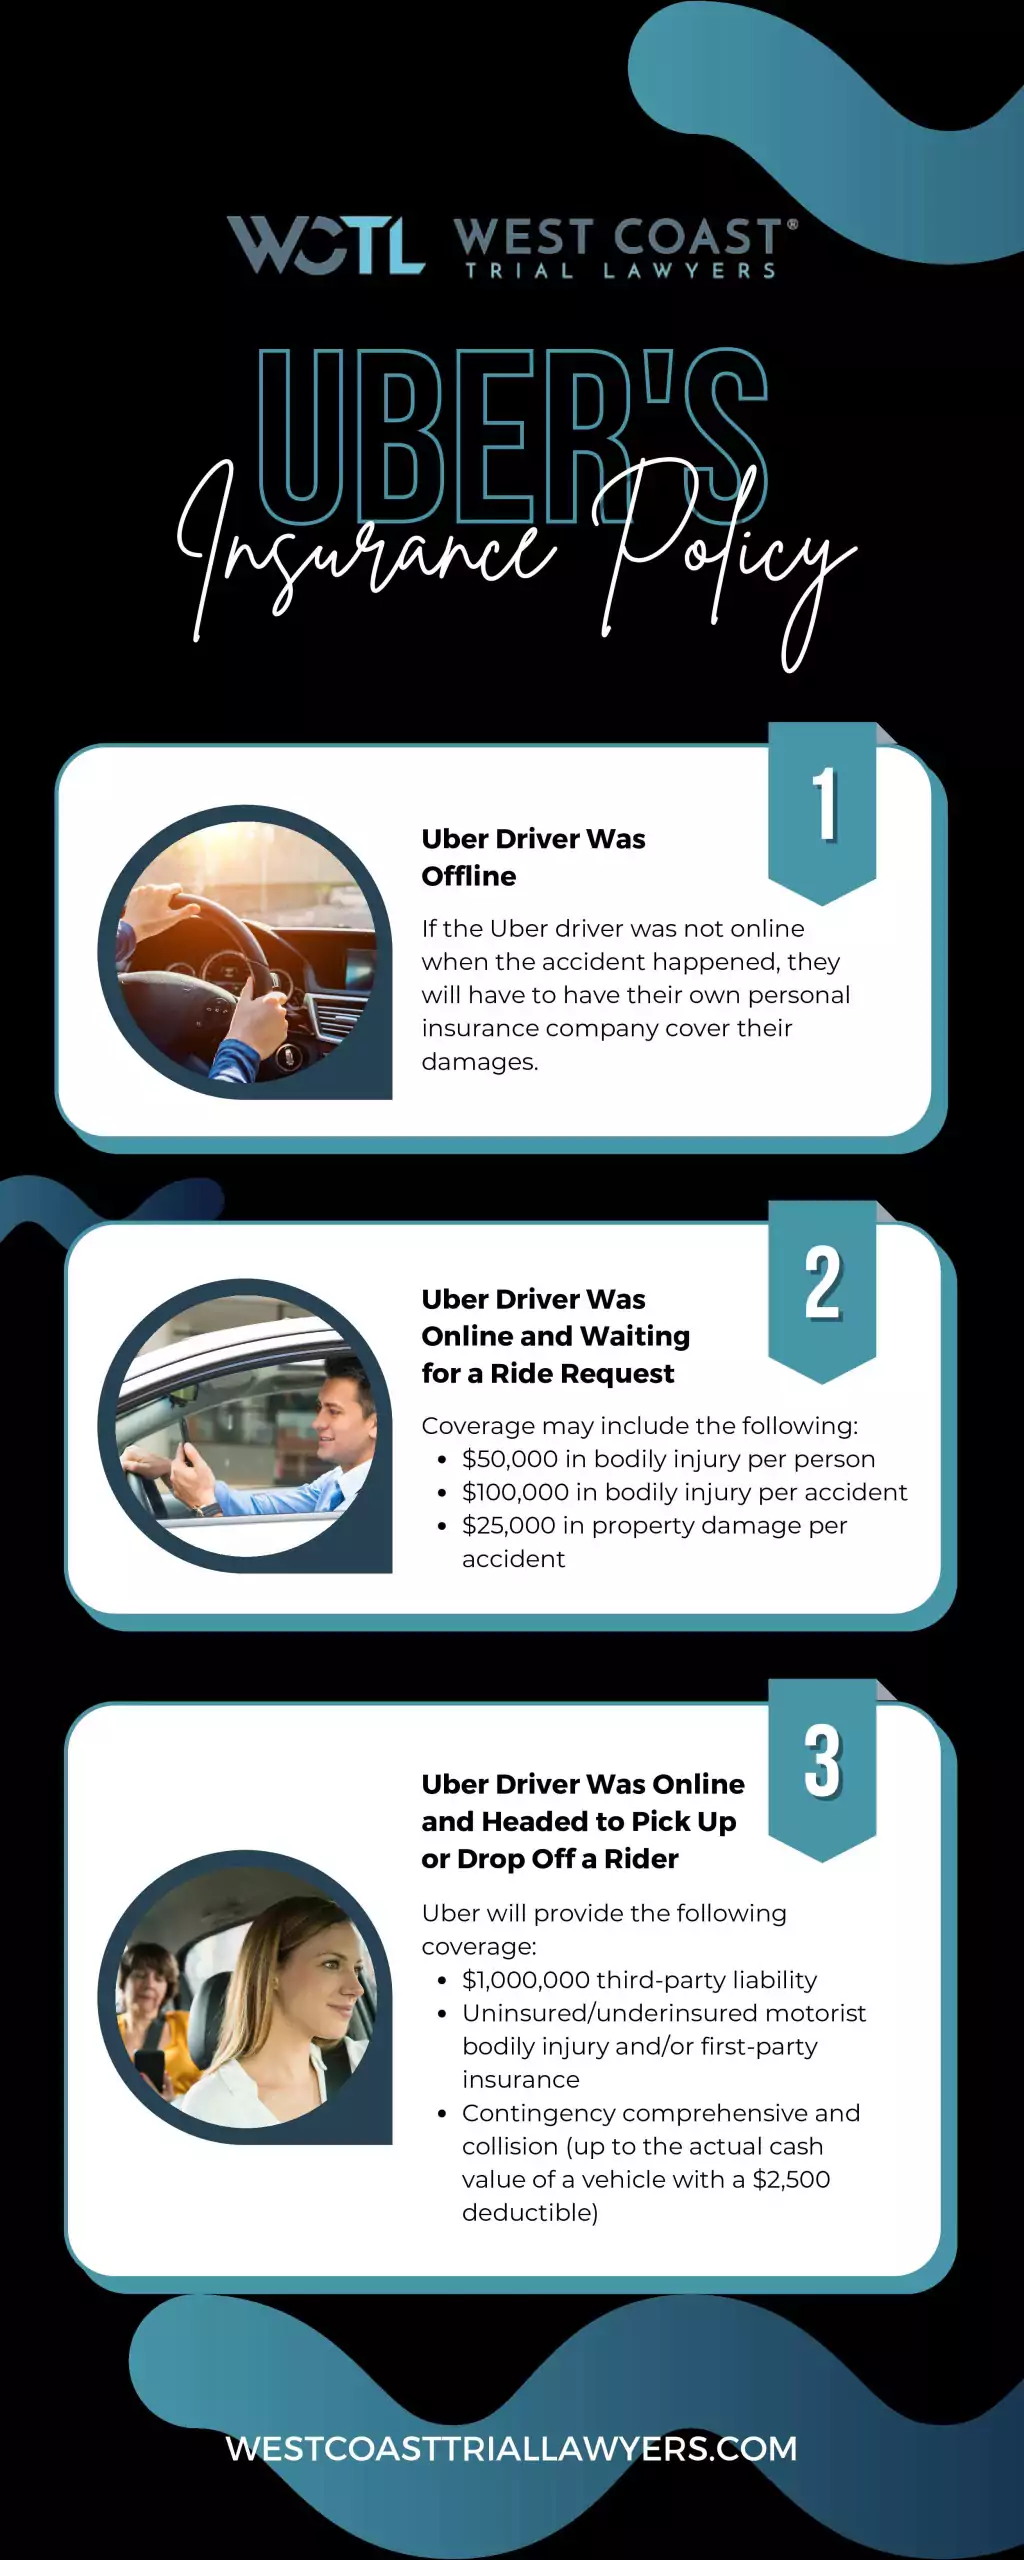 What to do as an Uber driver if you've been in an accident